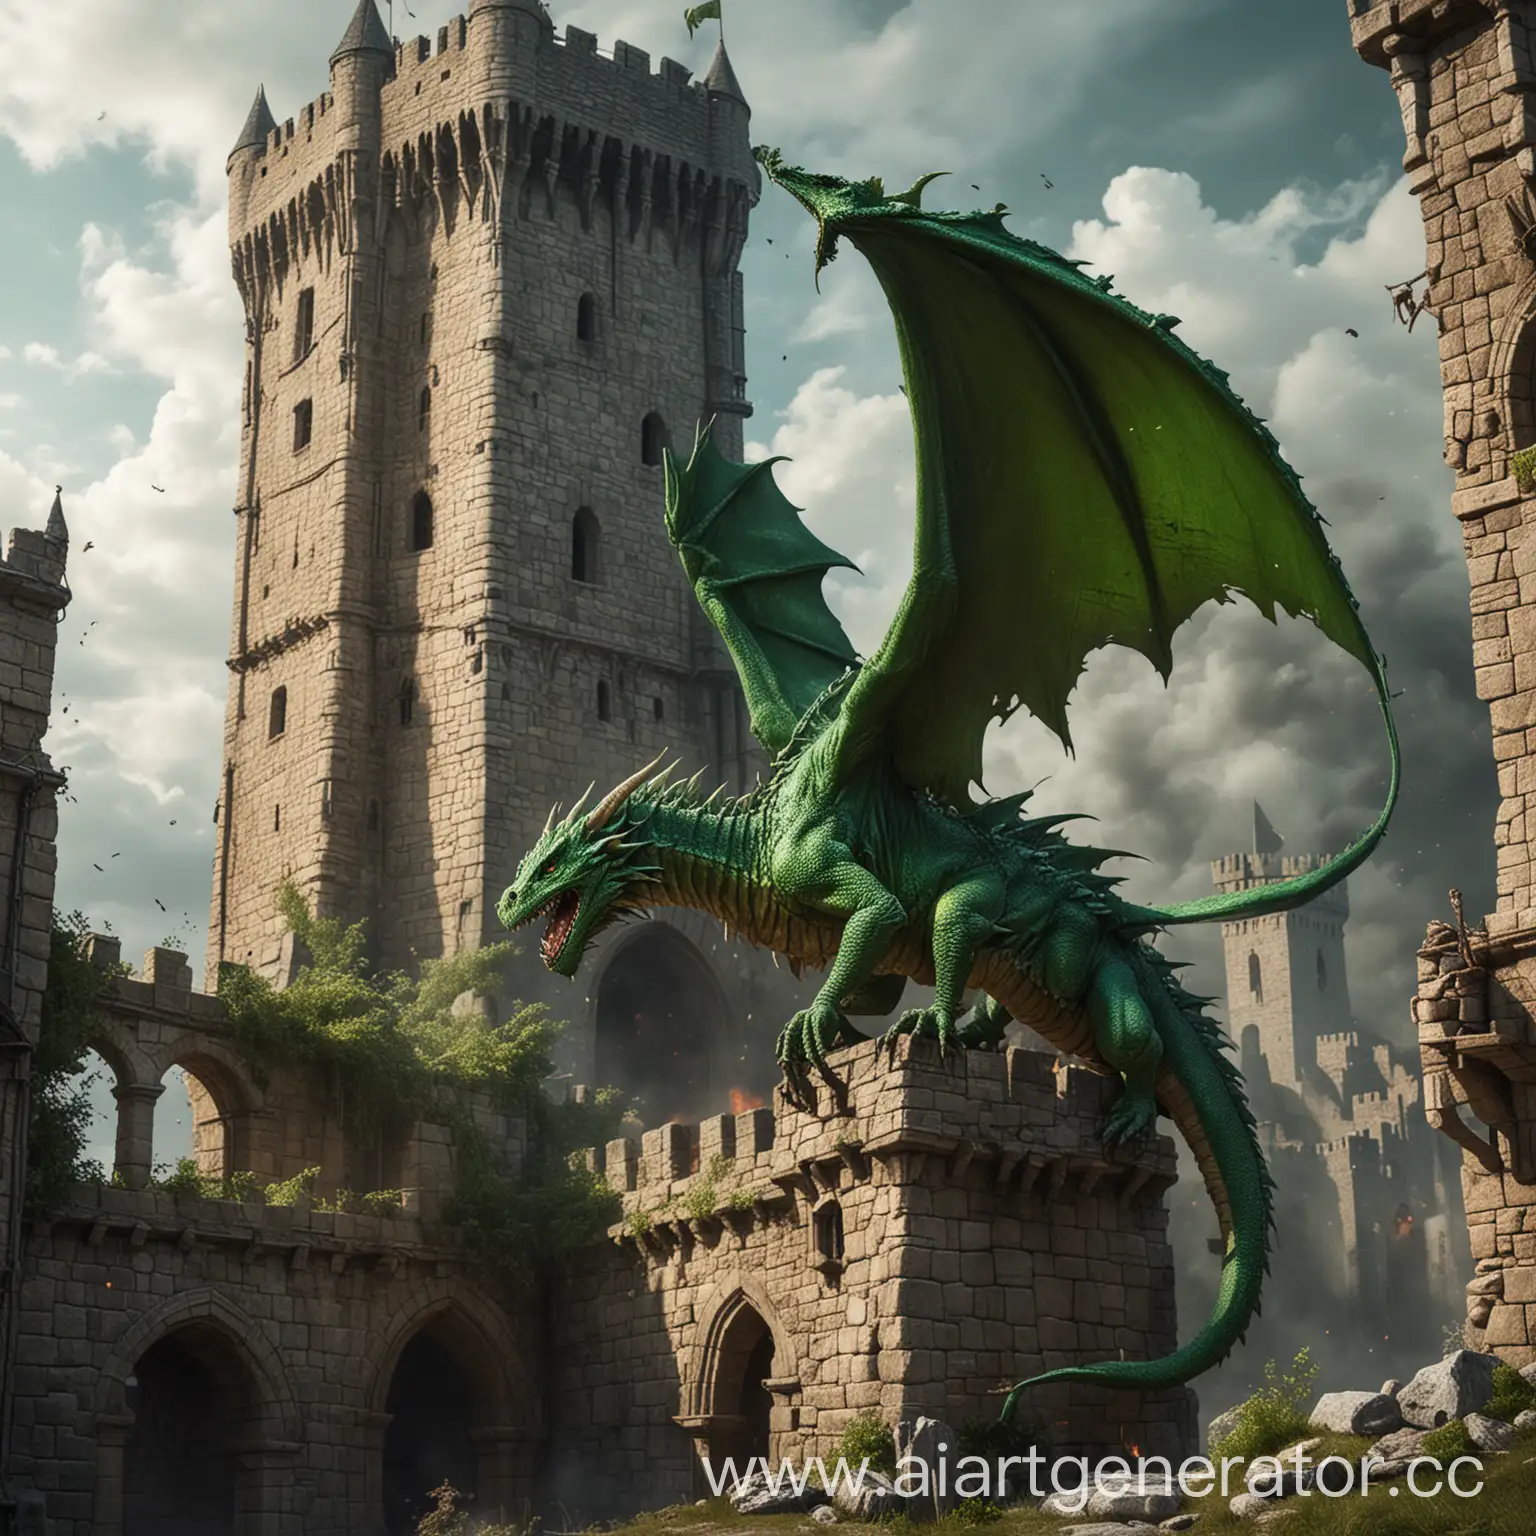 A green poisonous dragon destroys a medieval tower
